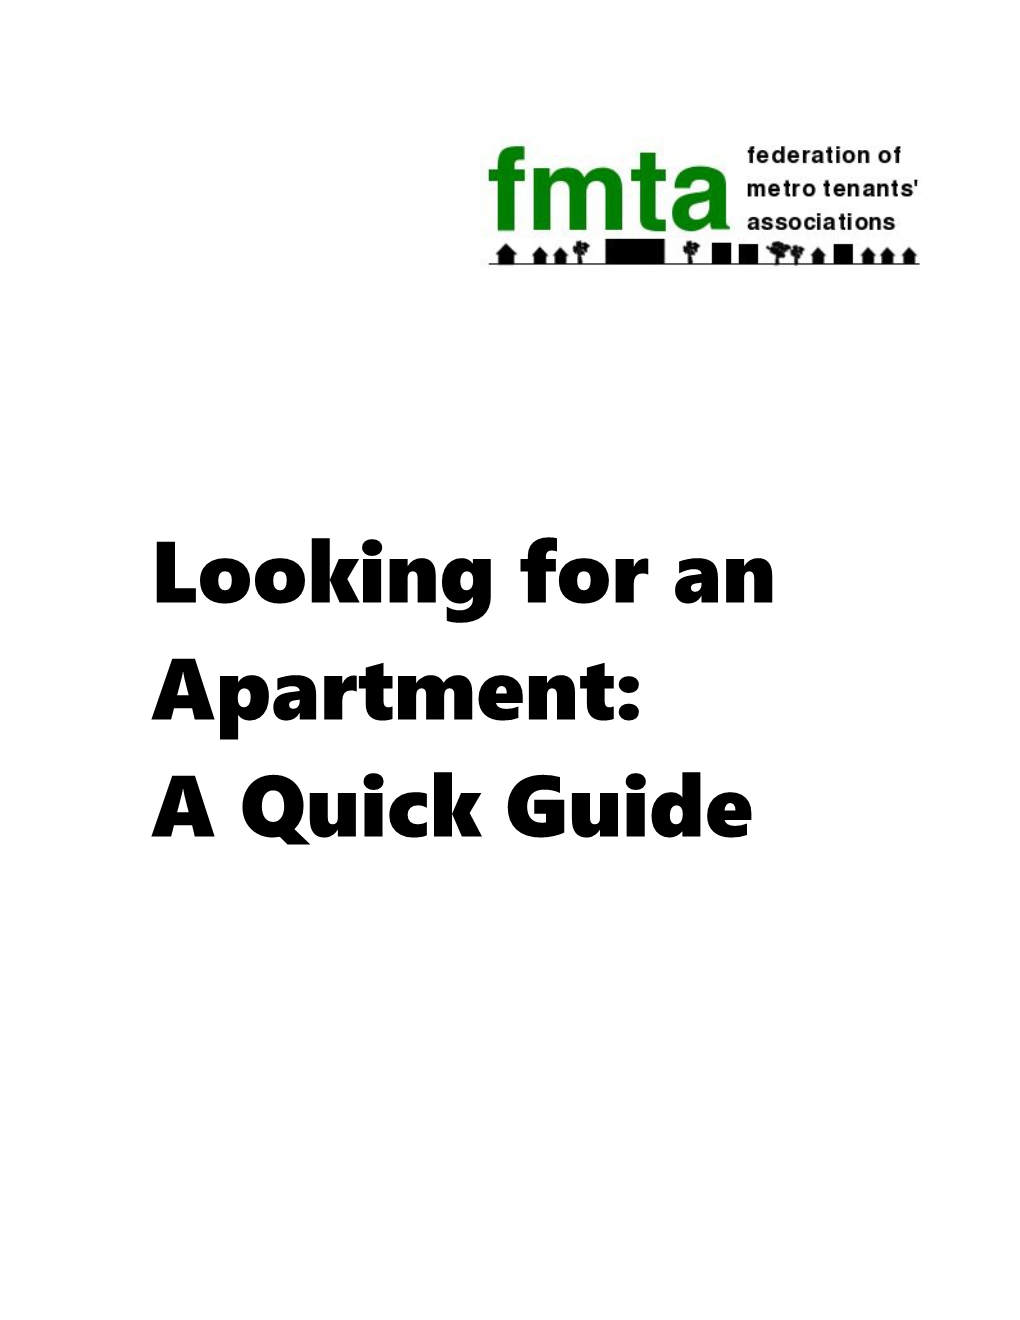 What to Ask a Landlord When Looking for an Apartment